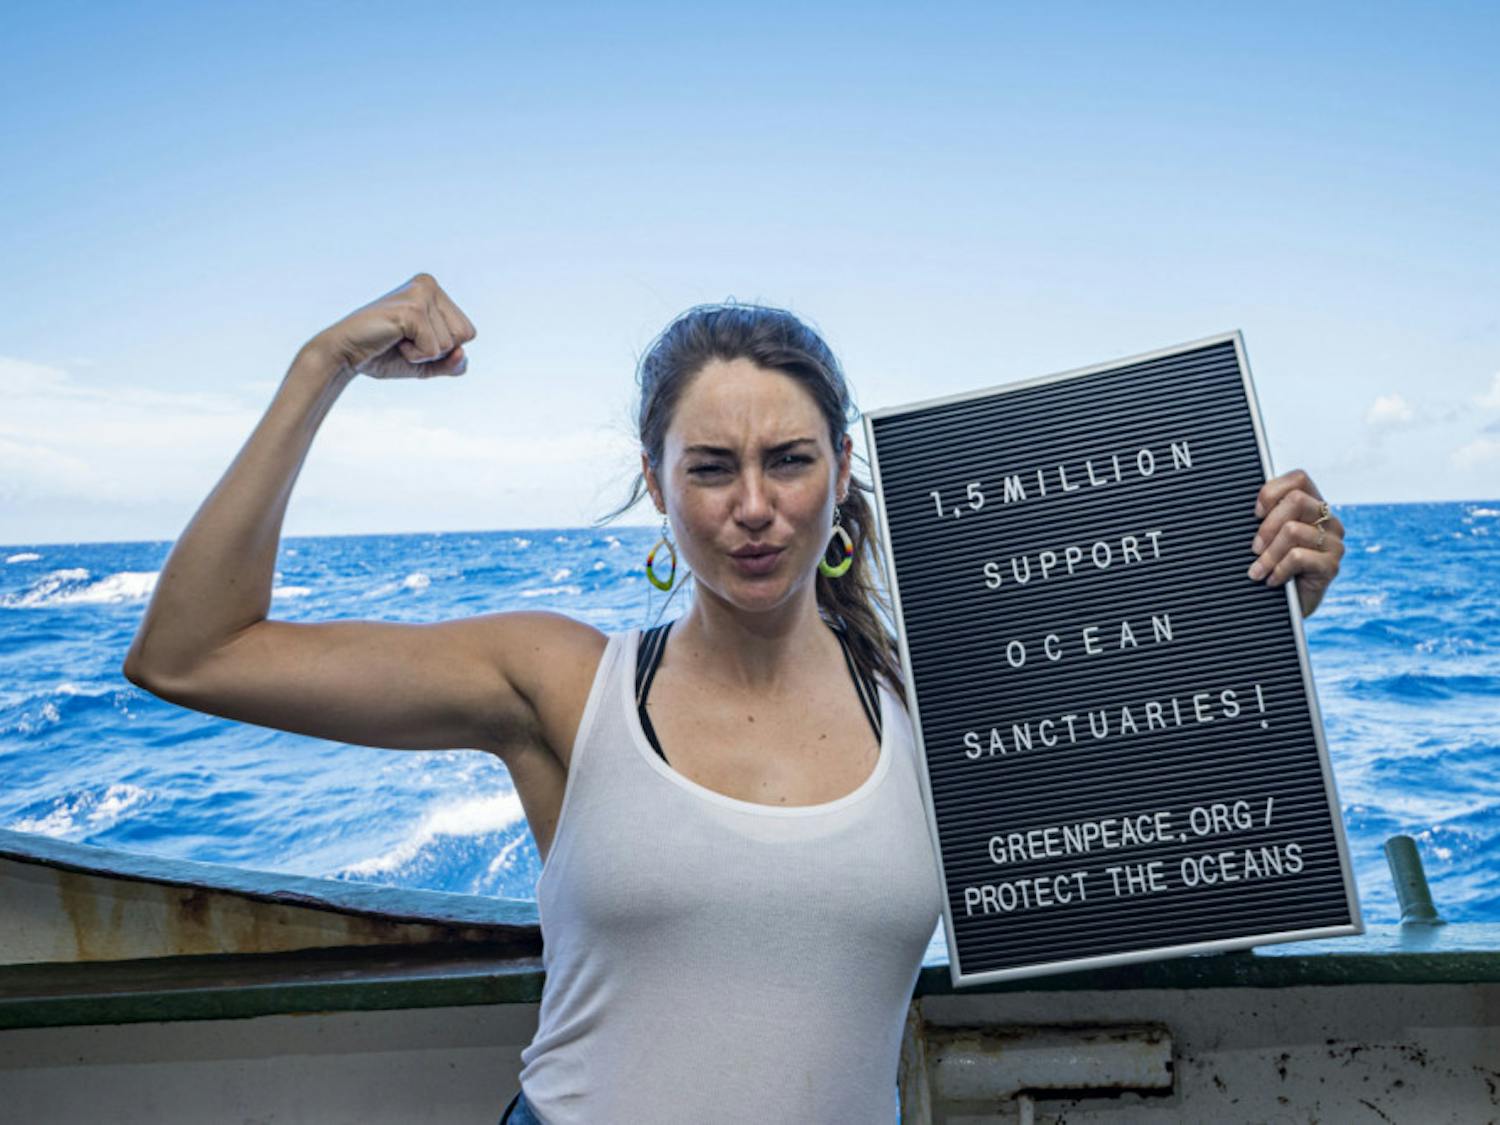 Shailene Woodley joined UF researchers Nerine Constant and&nbsp;Alexandra Gulick on a Greenpeace expedition to the Sargasso Sea. Woodley wrote a TIME article detailing her experiences on the expedition and how she will continue advocating for protecting the oceans.© Shane Gross / Greenpeace&nbsp;